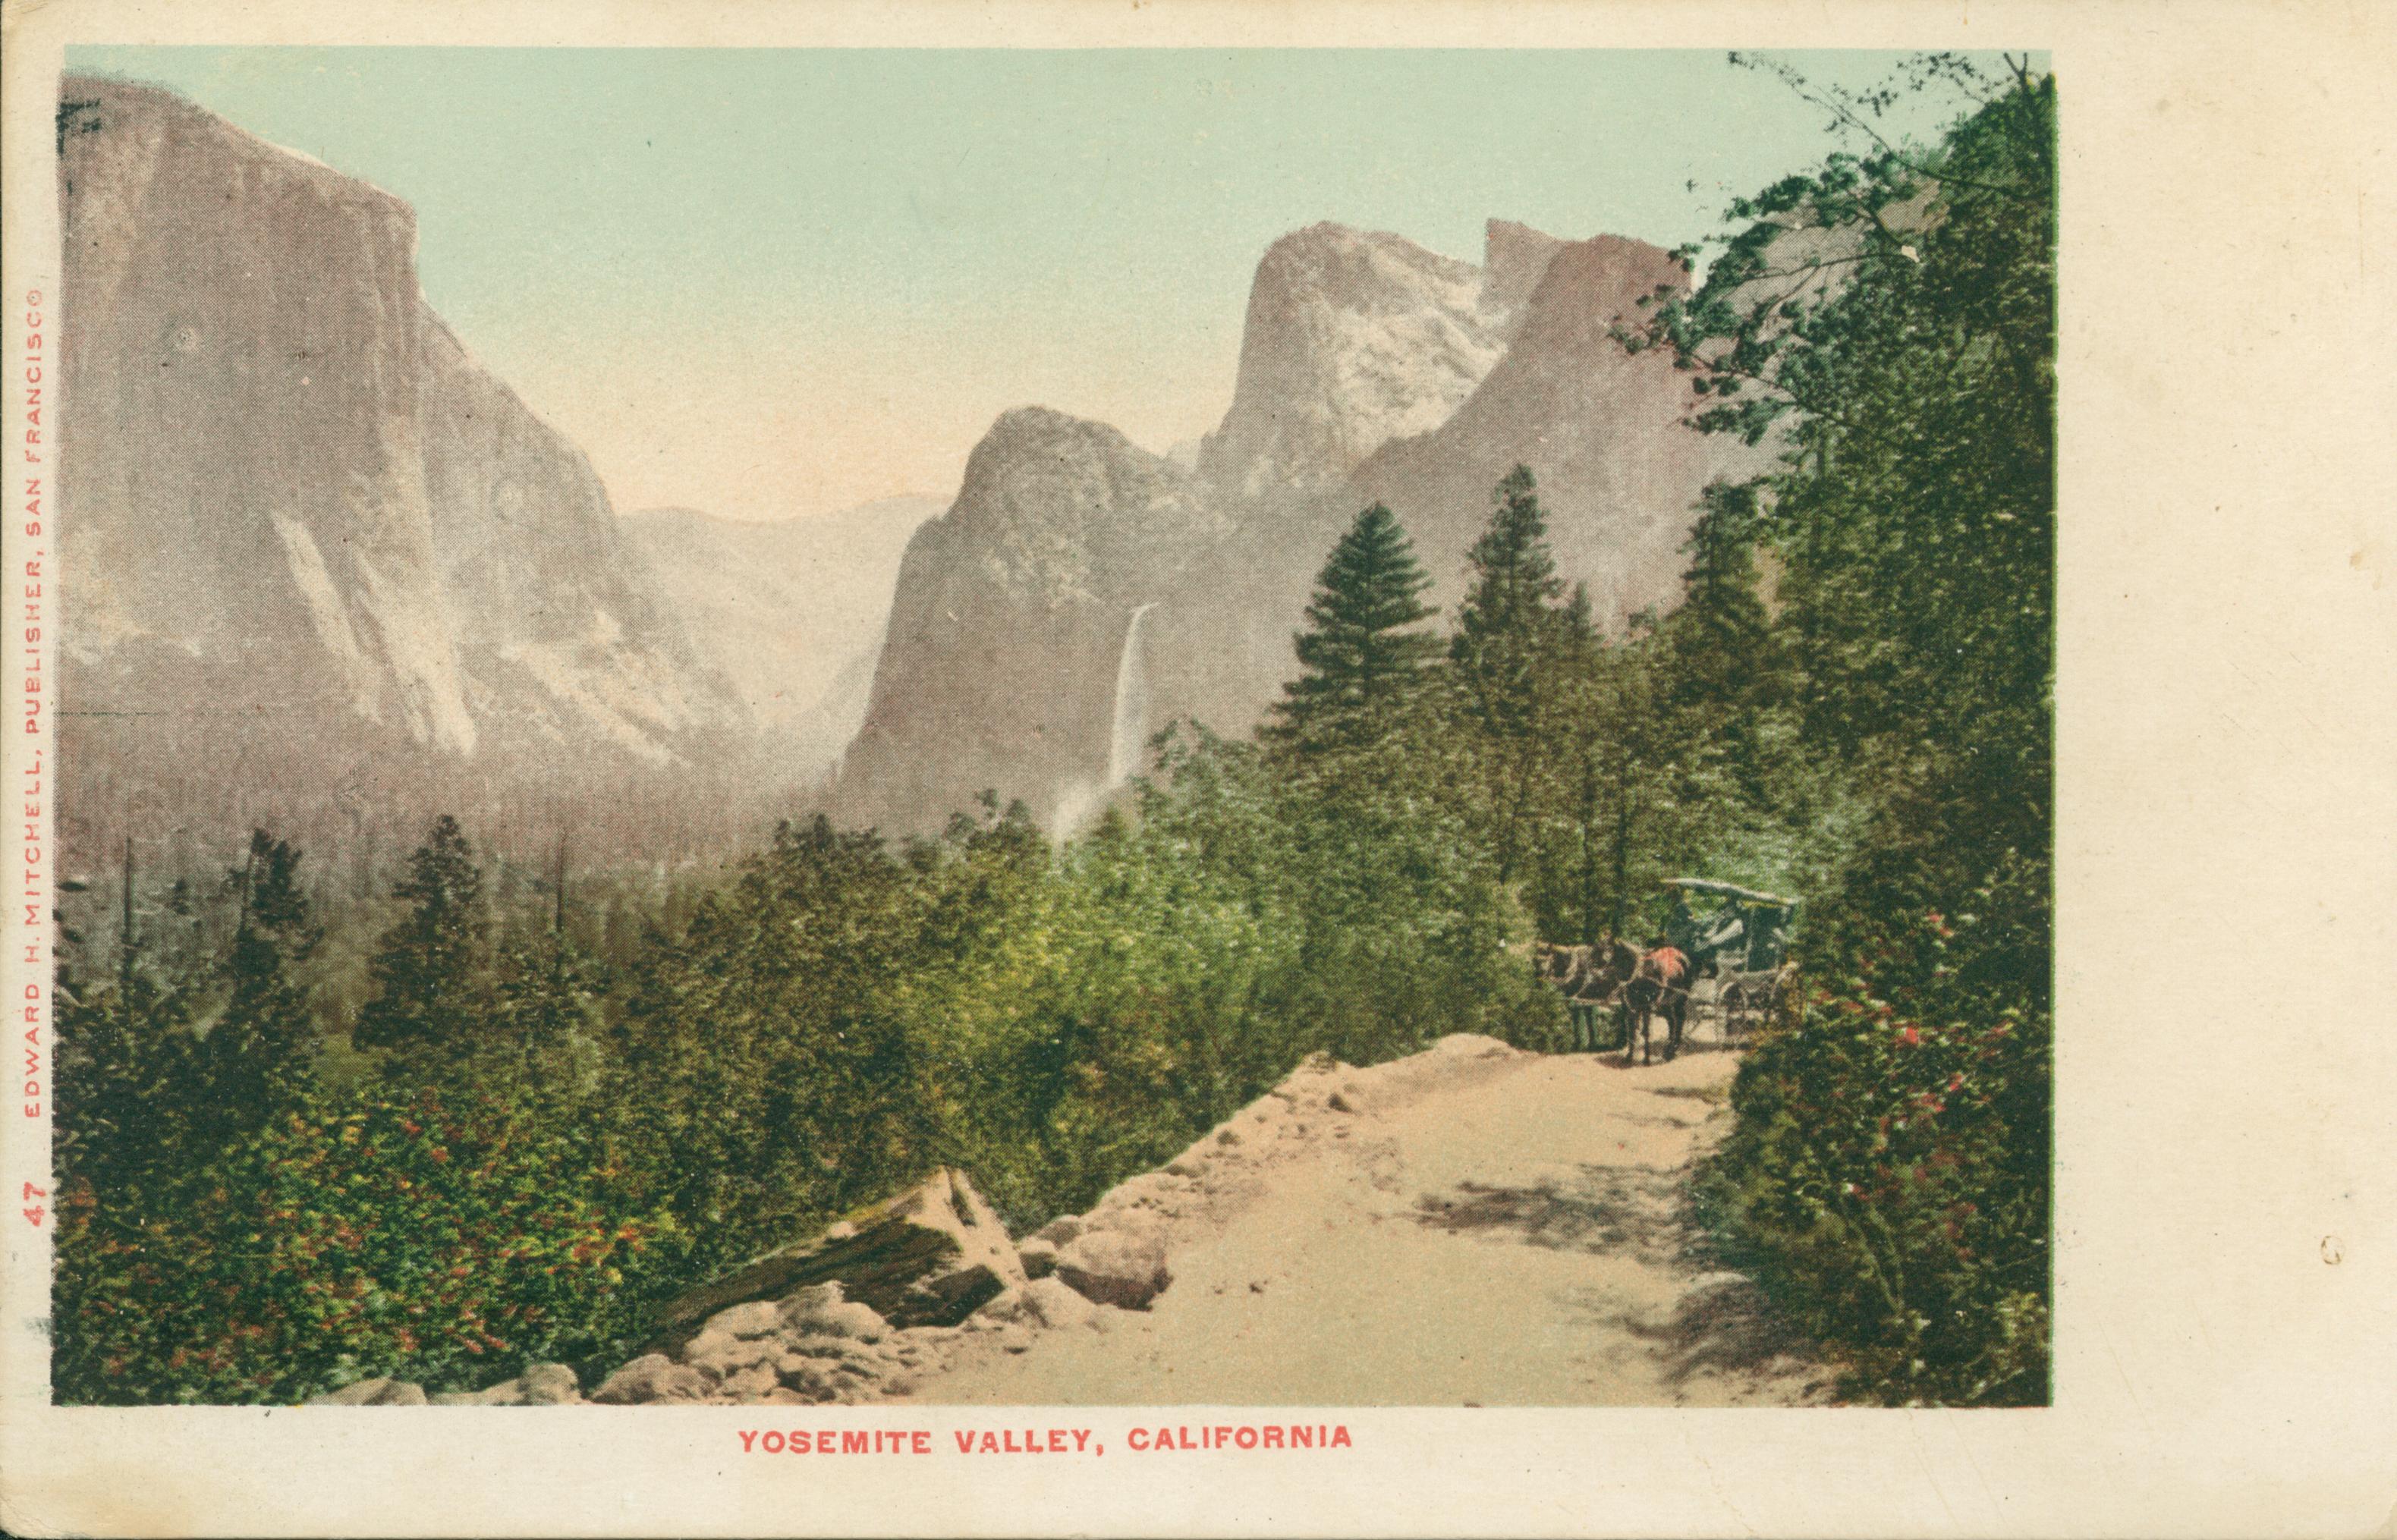 Shows a tree-lined trail overlooking the Yosemite Valley